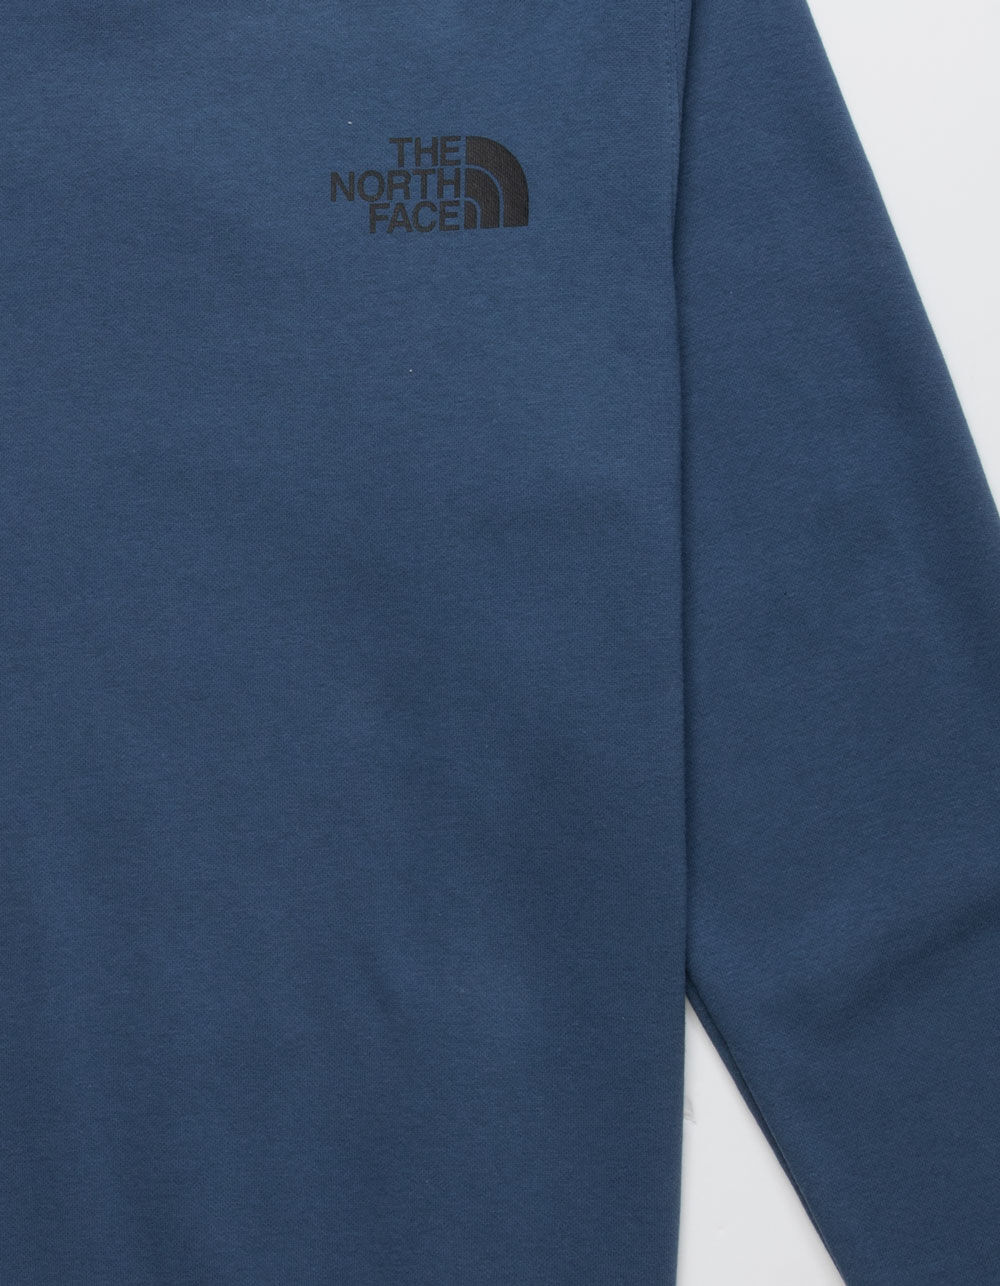 THE NORTH FACE Places We Love Mens Crew Sweatshirt - NAVY | Tillys